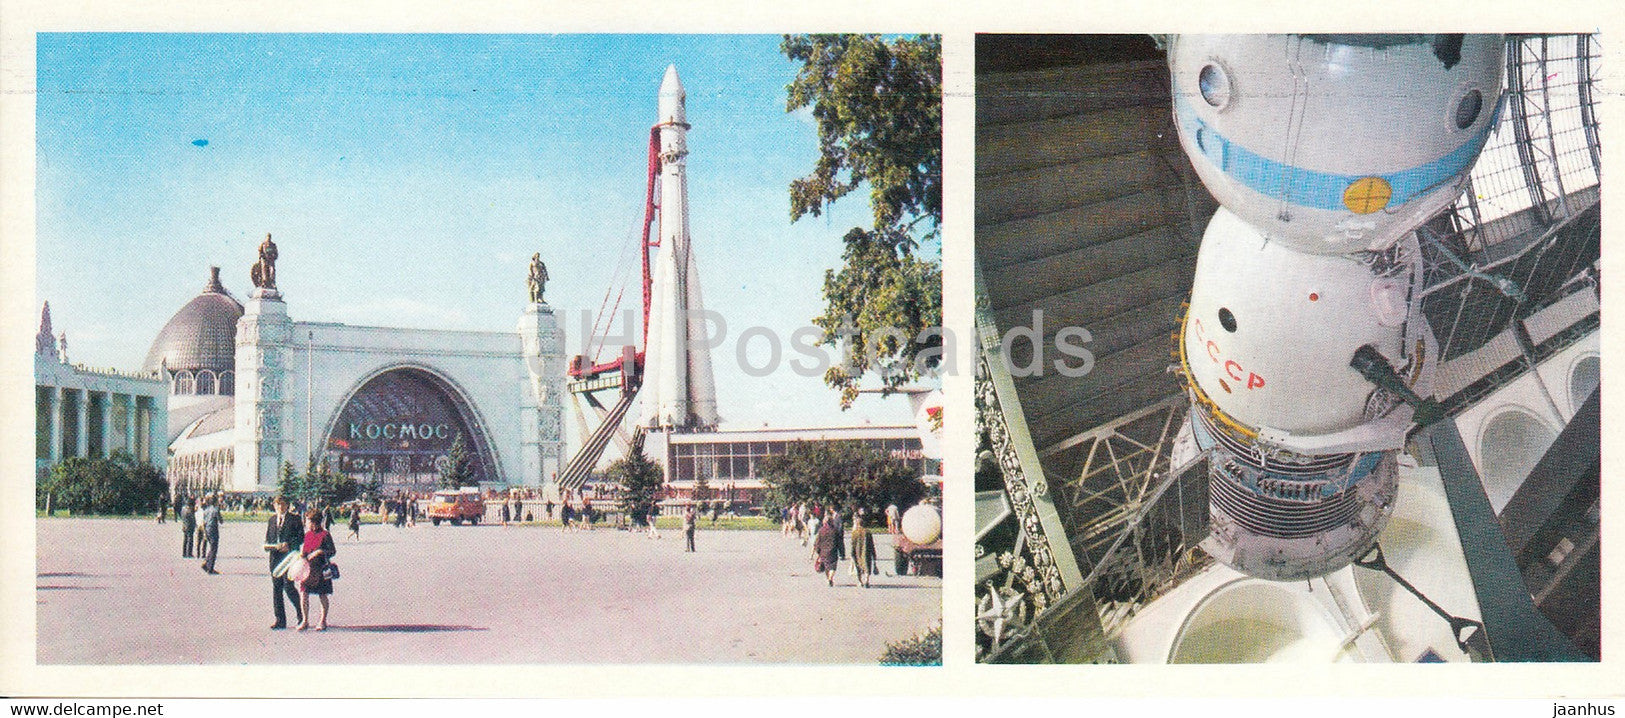 The Cosmos Pavilion - Space Ship Soyuz - rocket - All Soviet Exhibition Center - VDNKh - 1975 - Russia USSR - unused - JH Postcards